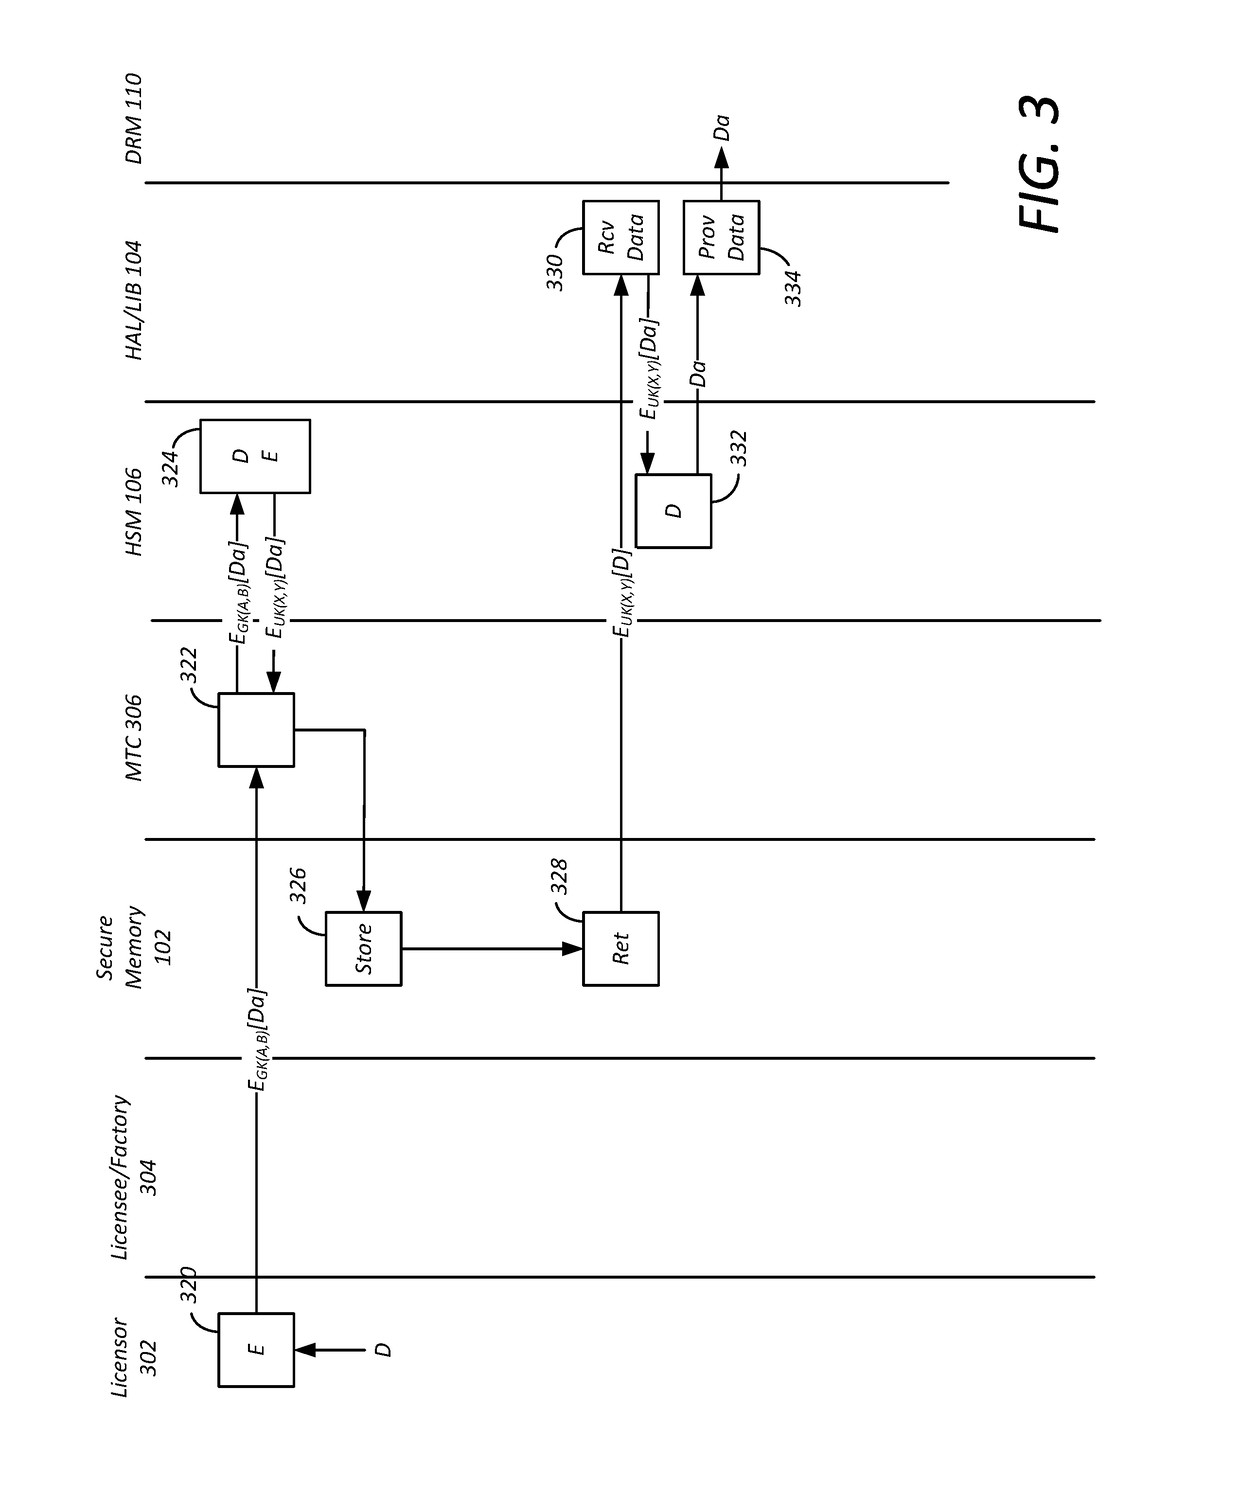 Method and apparatus for protecting confidential data in an open software stack